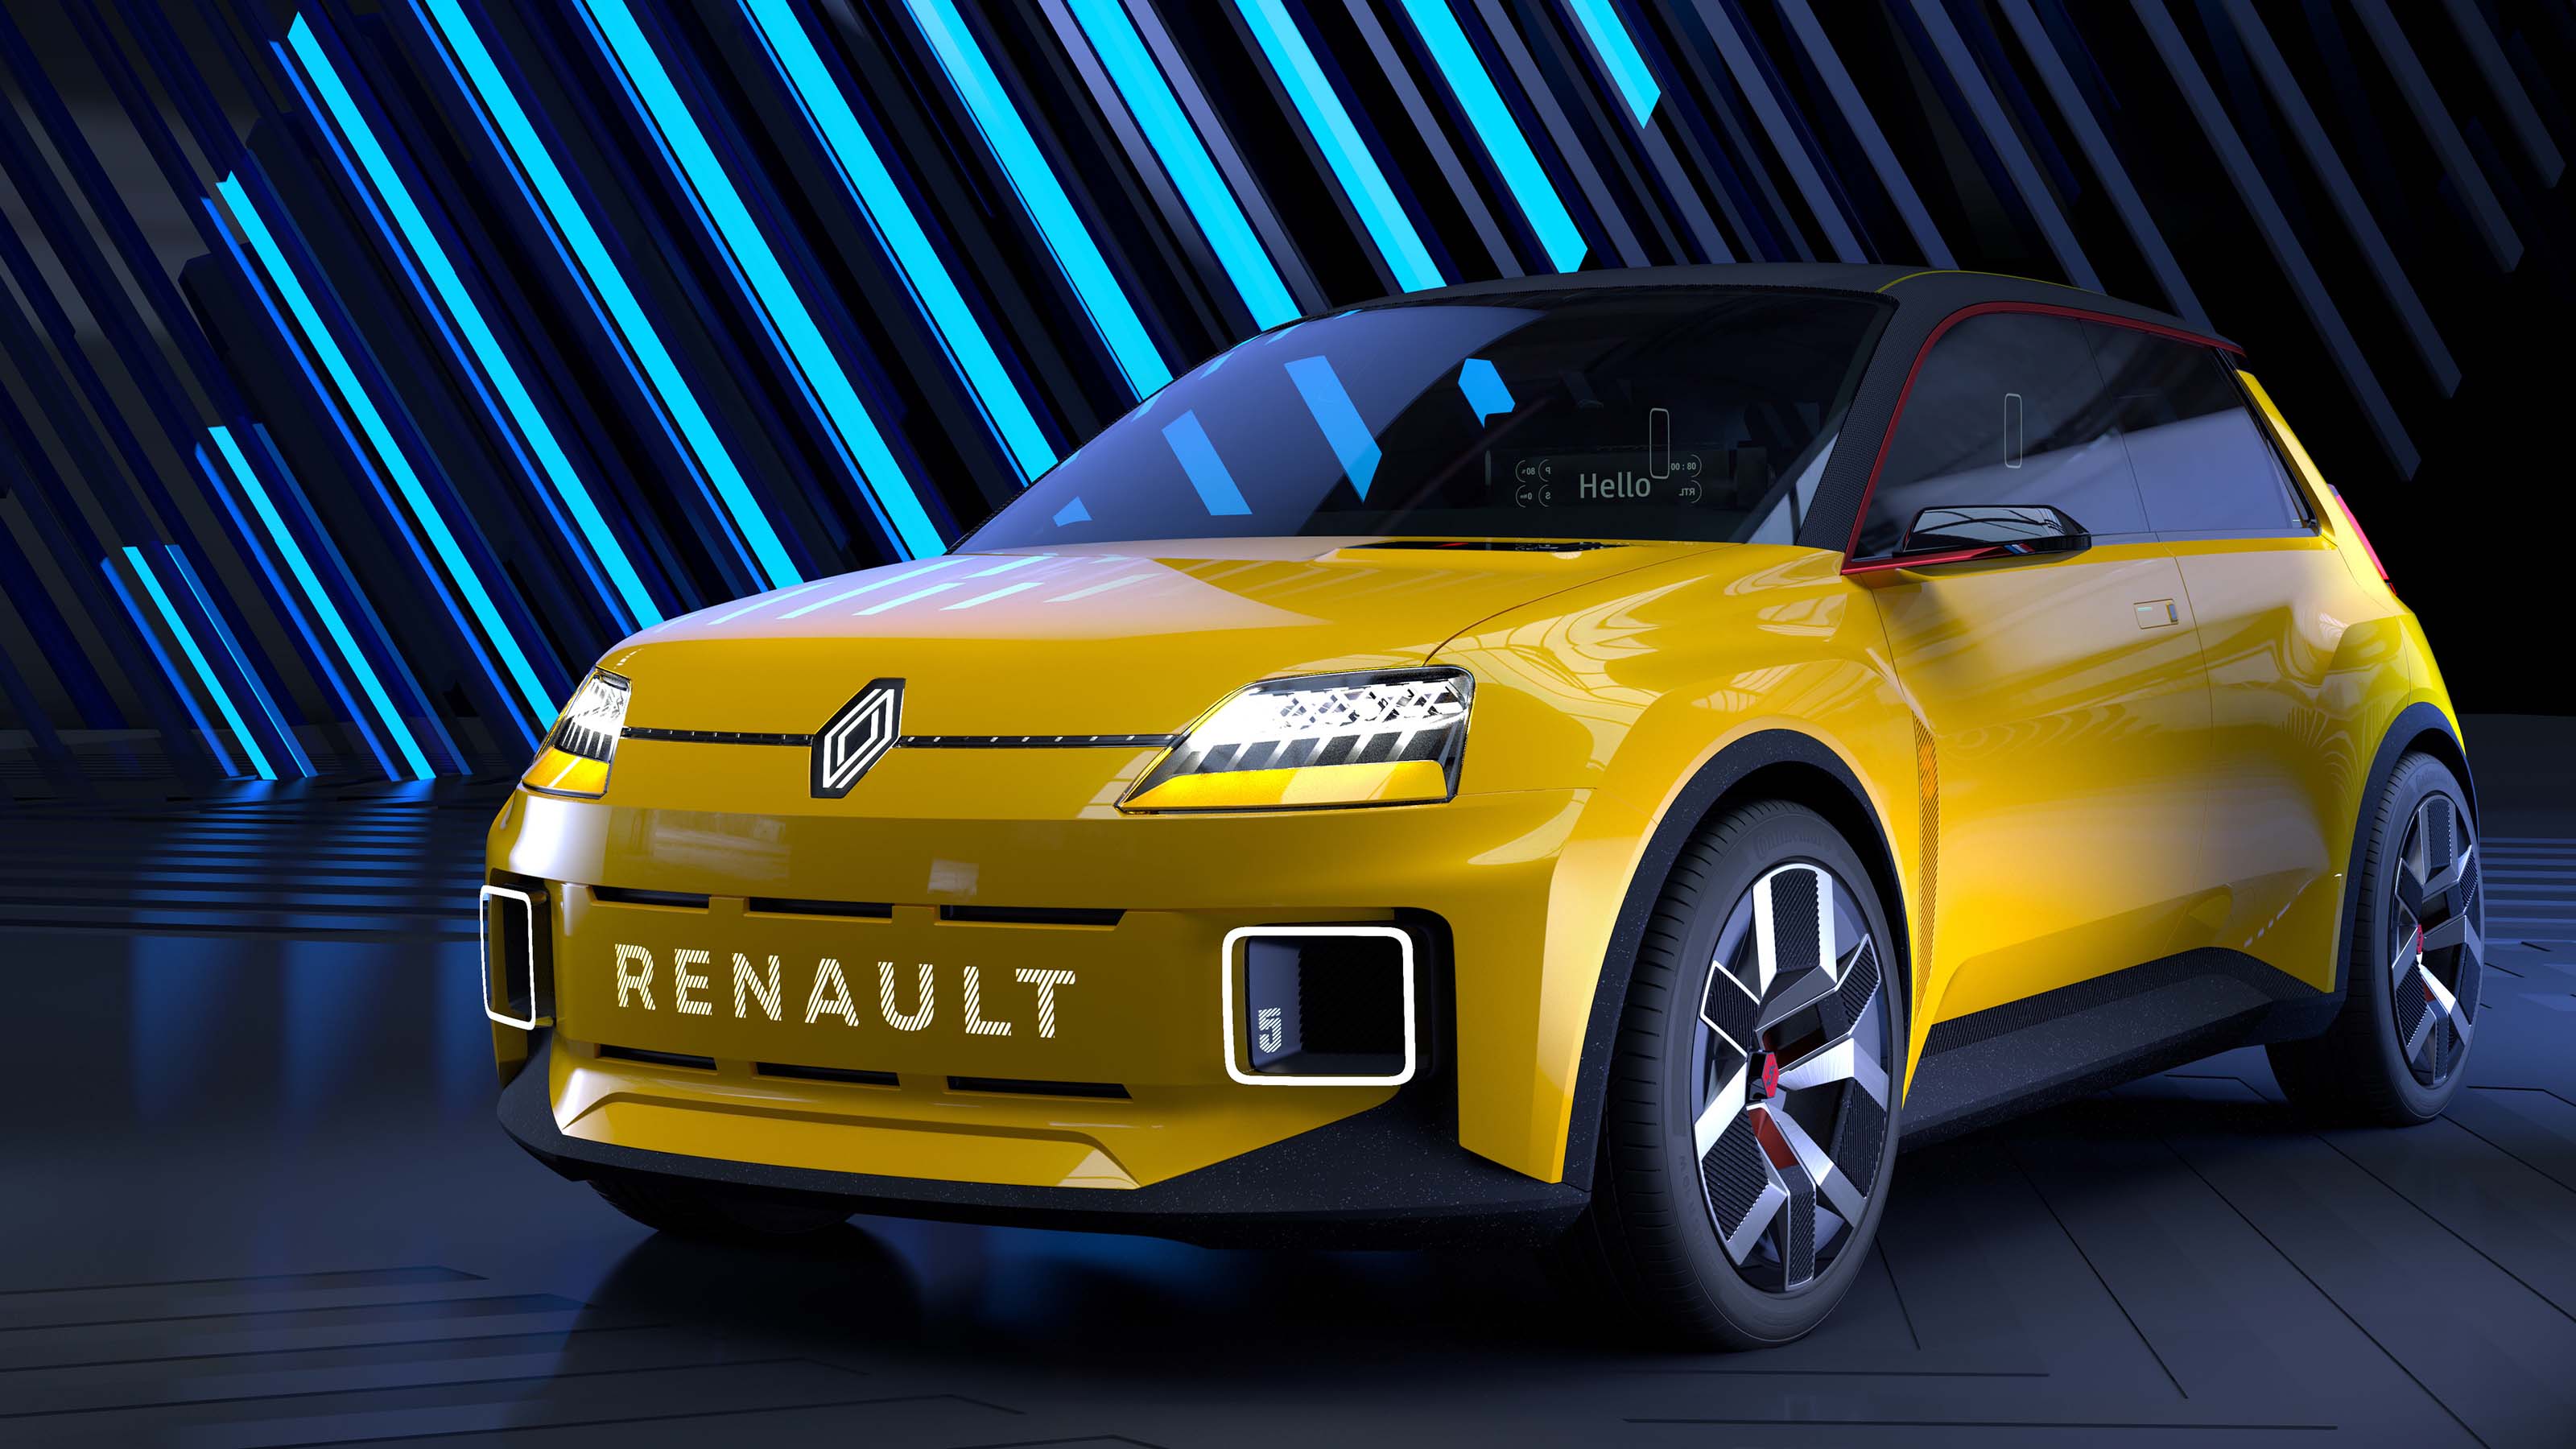 New Renault 5 electric car: sub-£20k price suggested for reborn classic